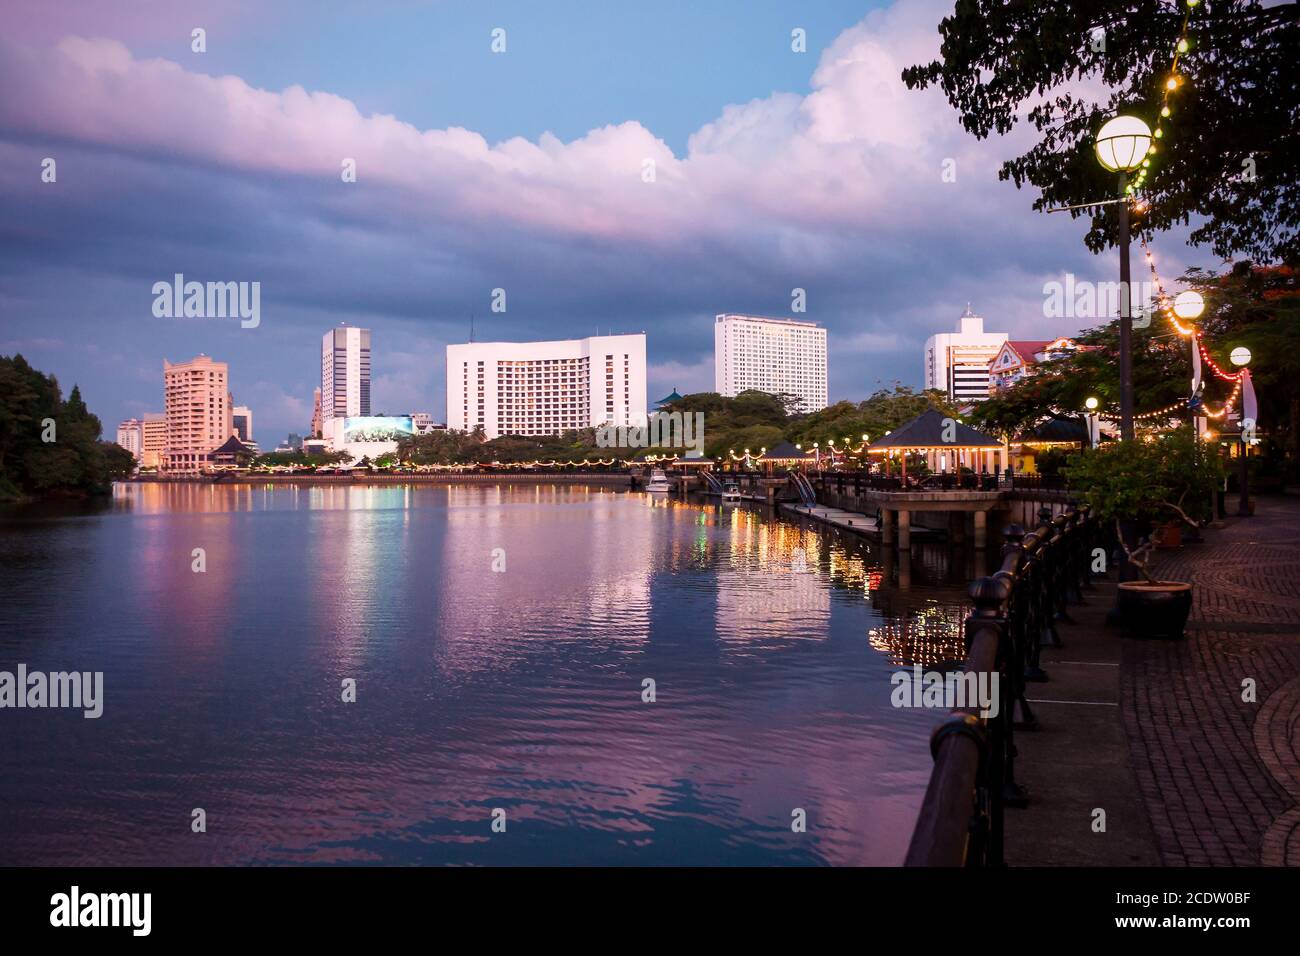 Kuching Waterfront at the Sarawak River at the Blue Hour Stock Photo